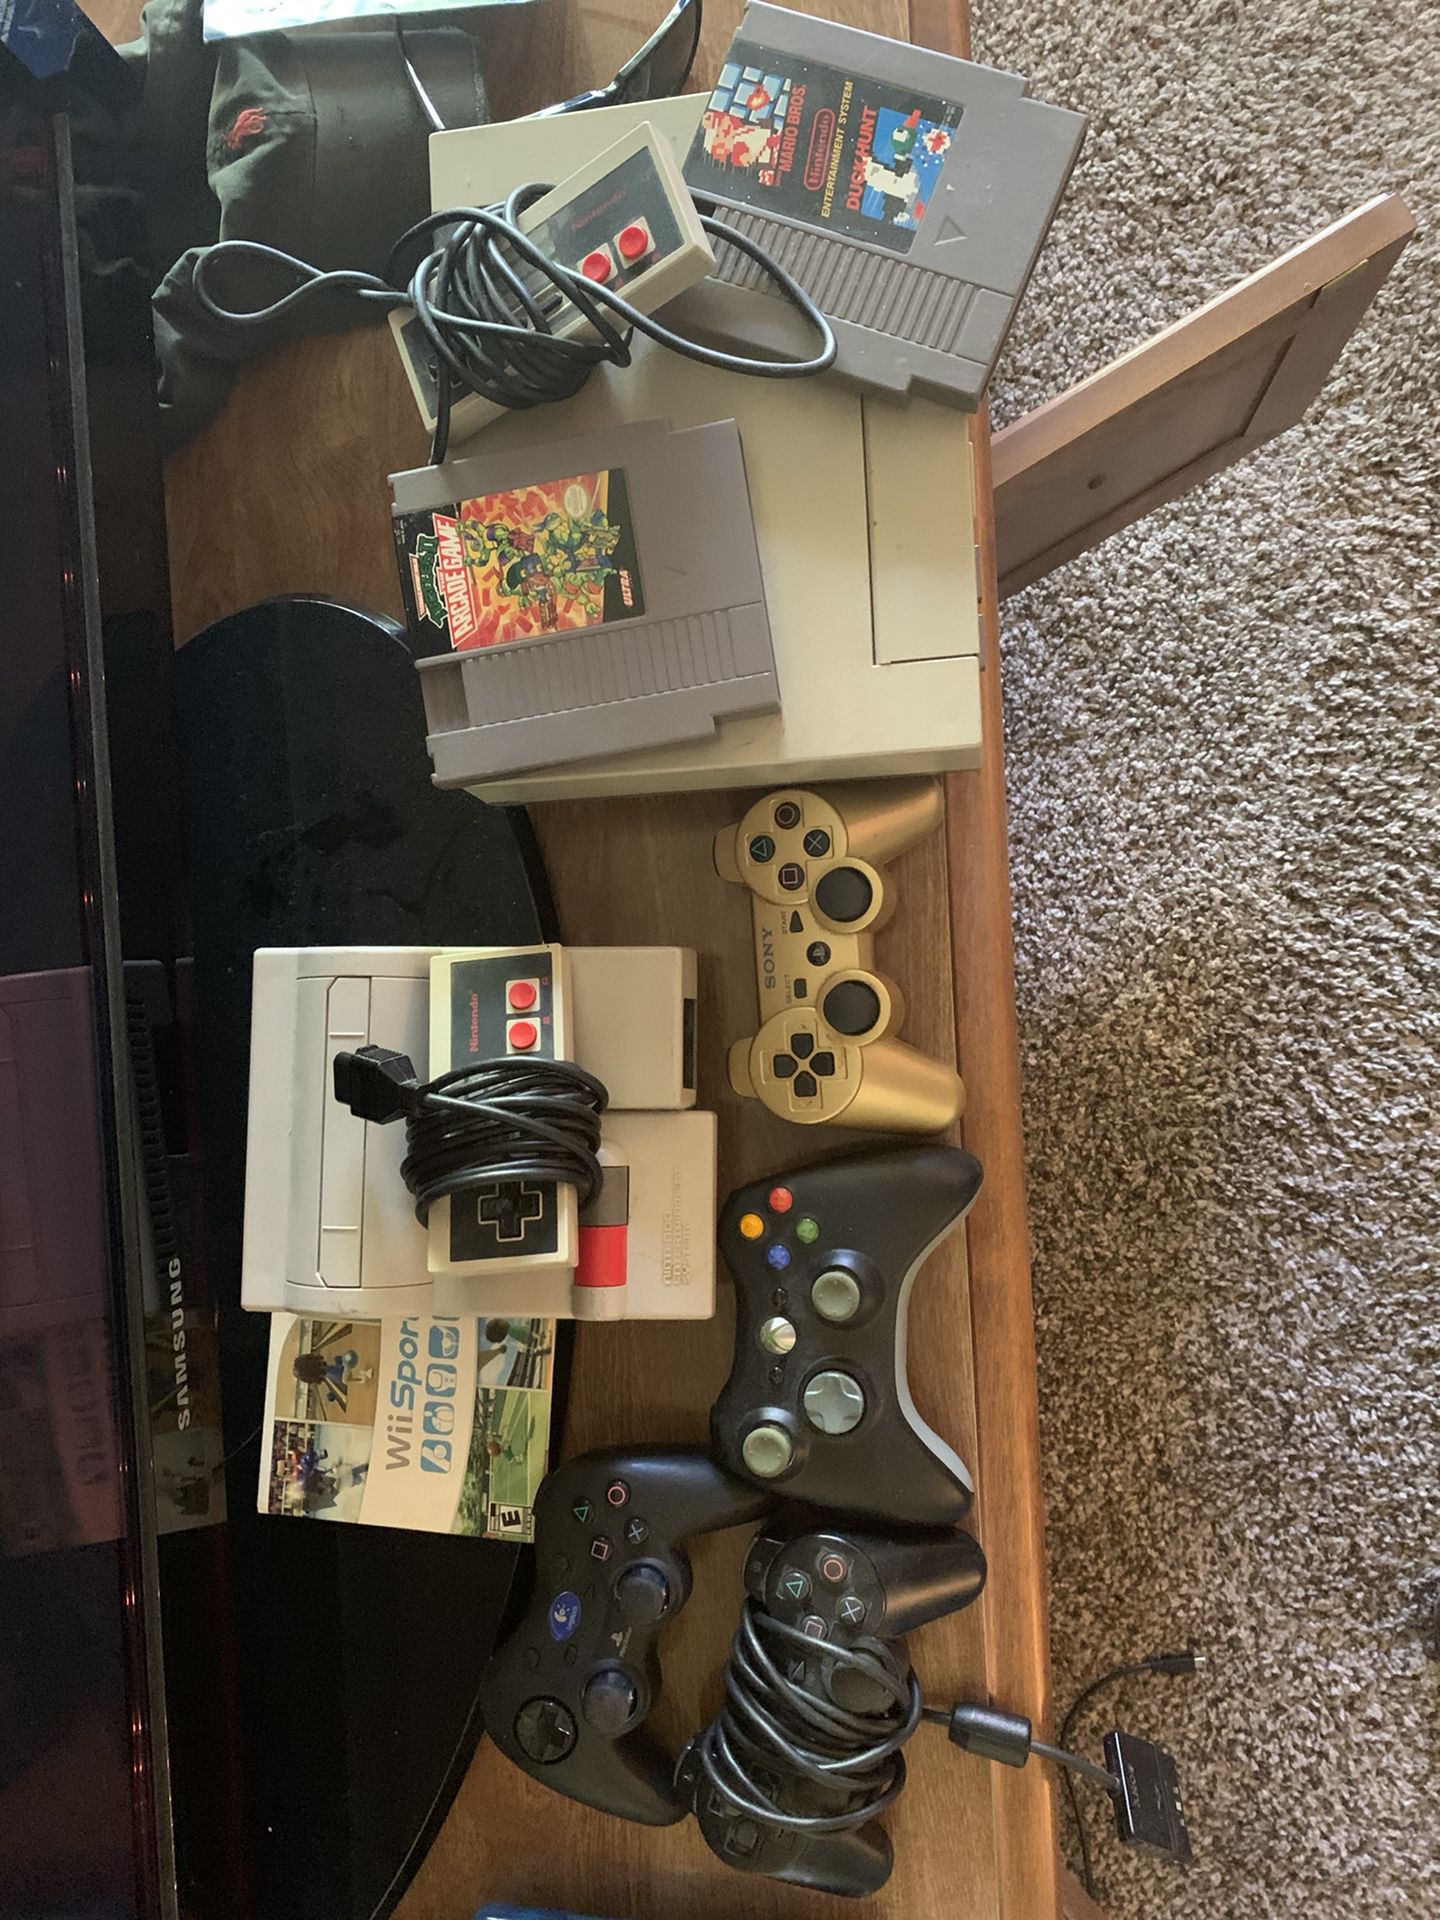 Nintendo console and controllers